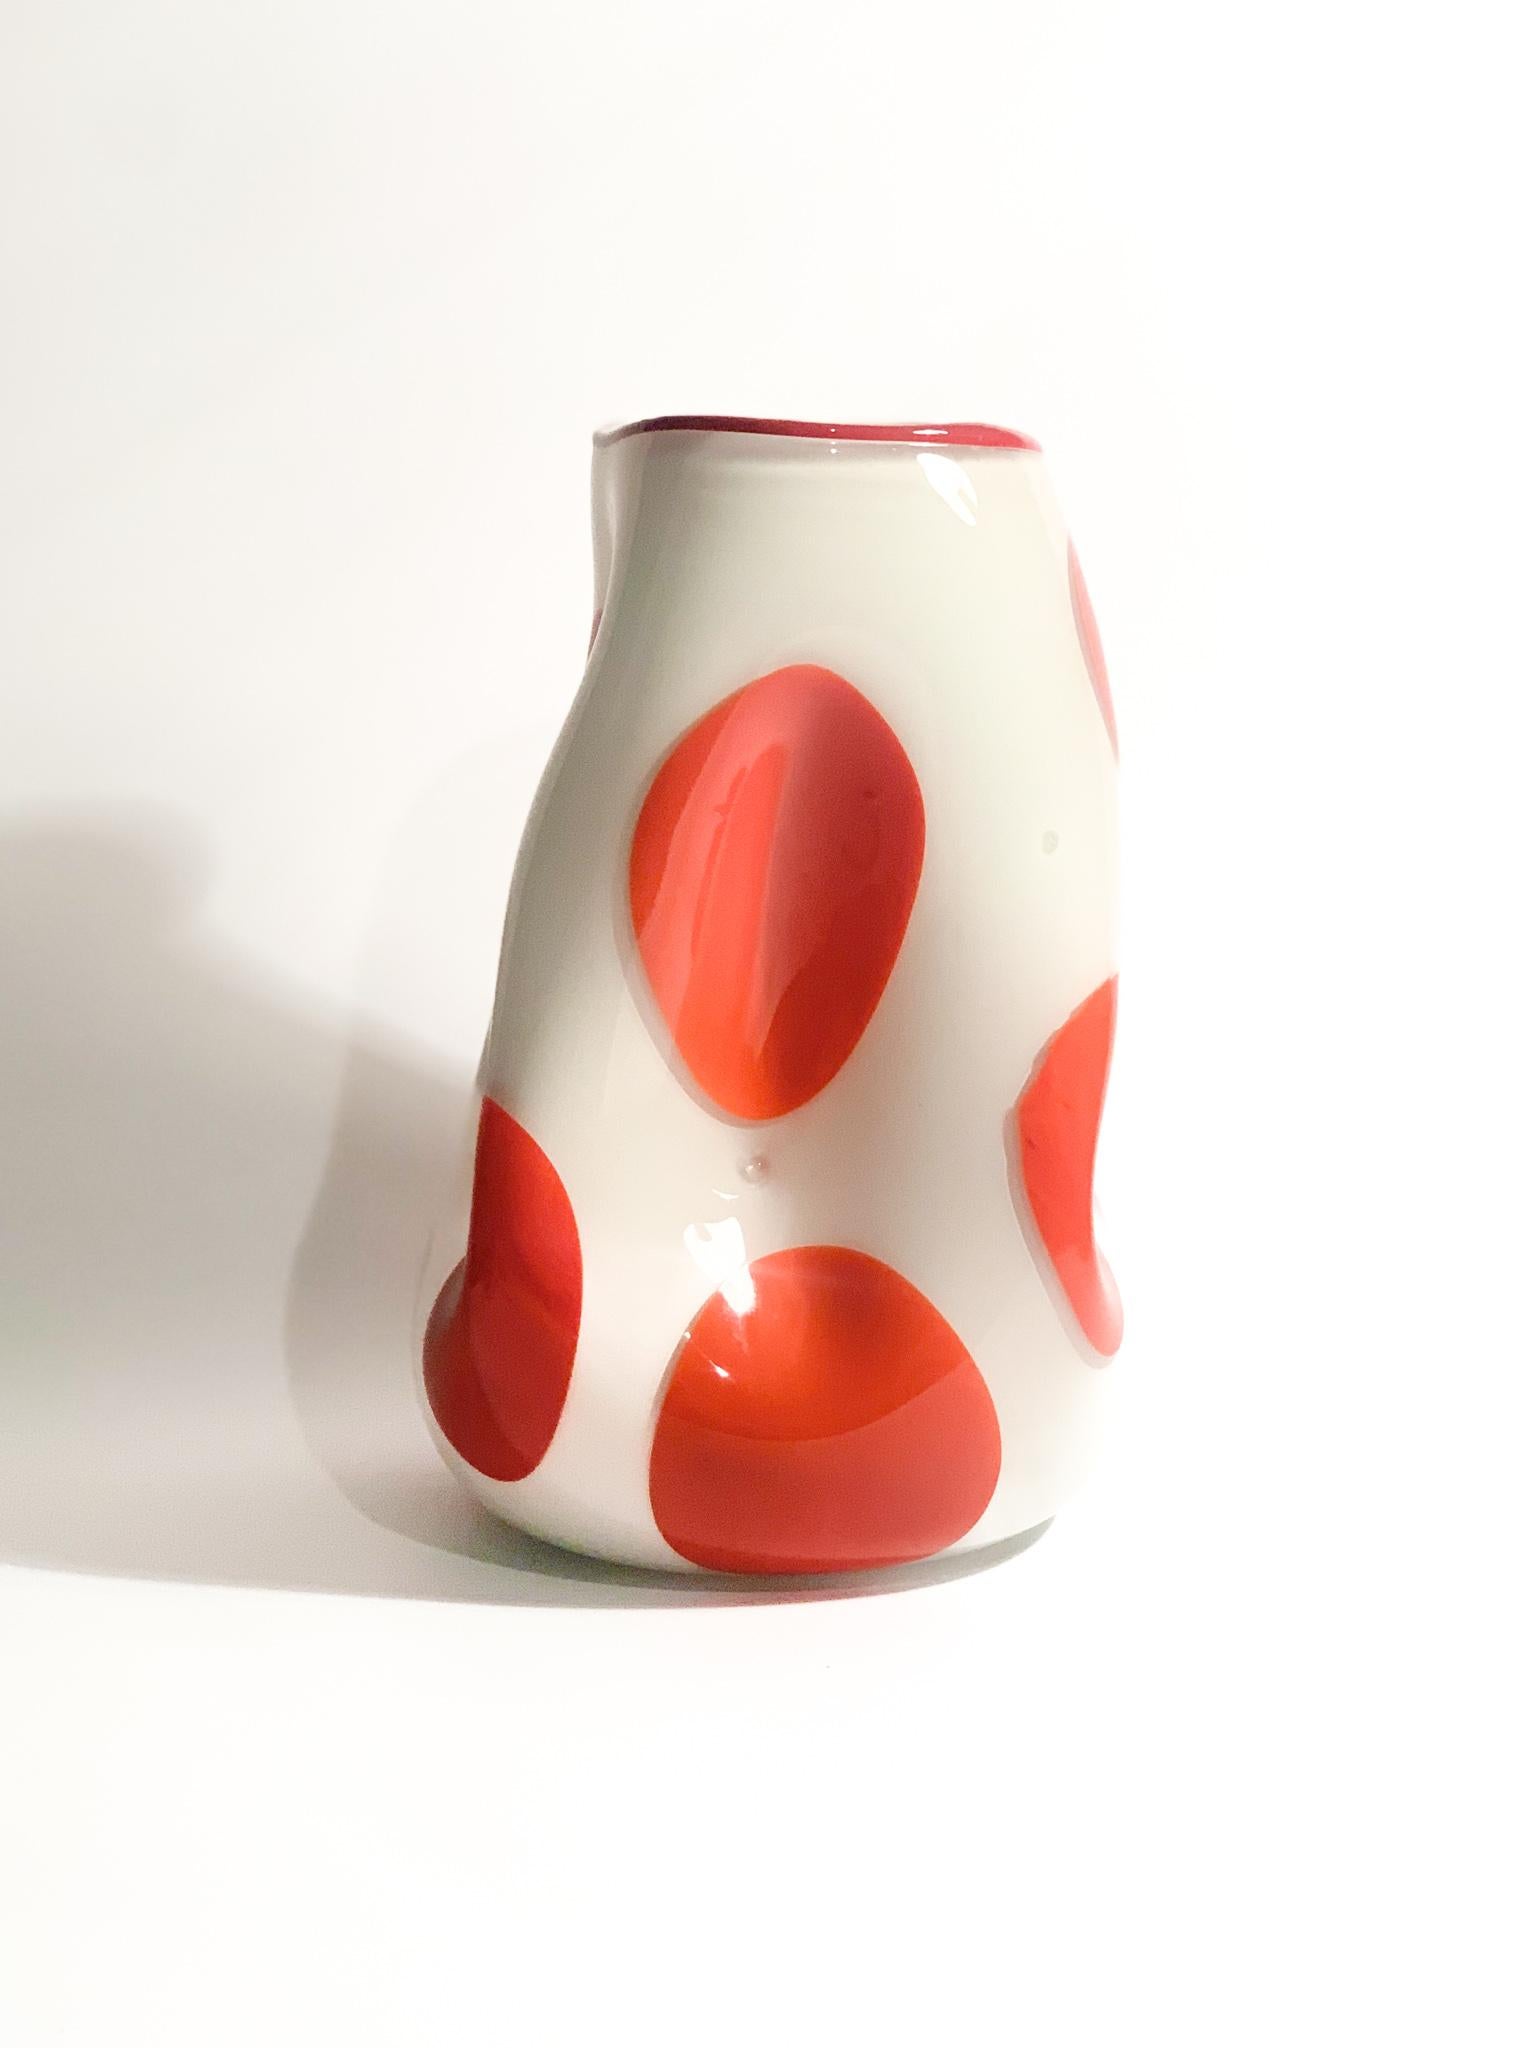 Rare Murano glass vase with dented shape, white and orange, made in the 1980s

Ø 16 cm Ø 15 cm h 27 cm